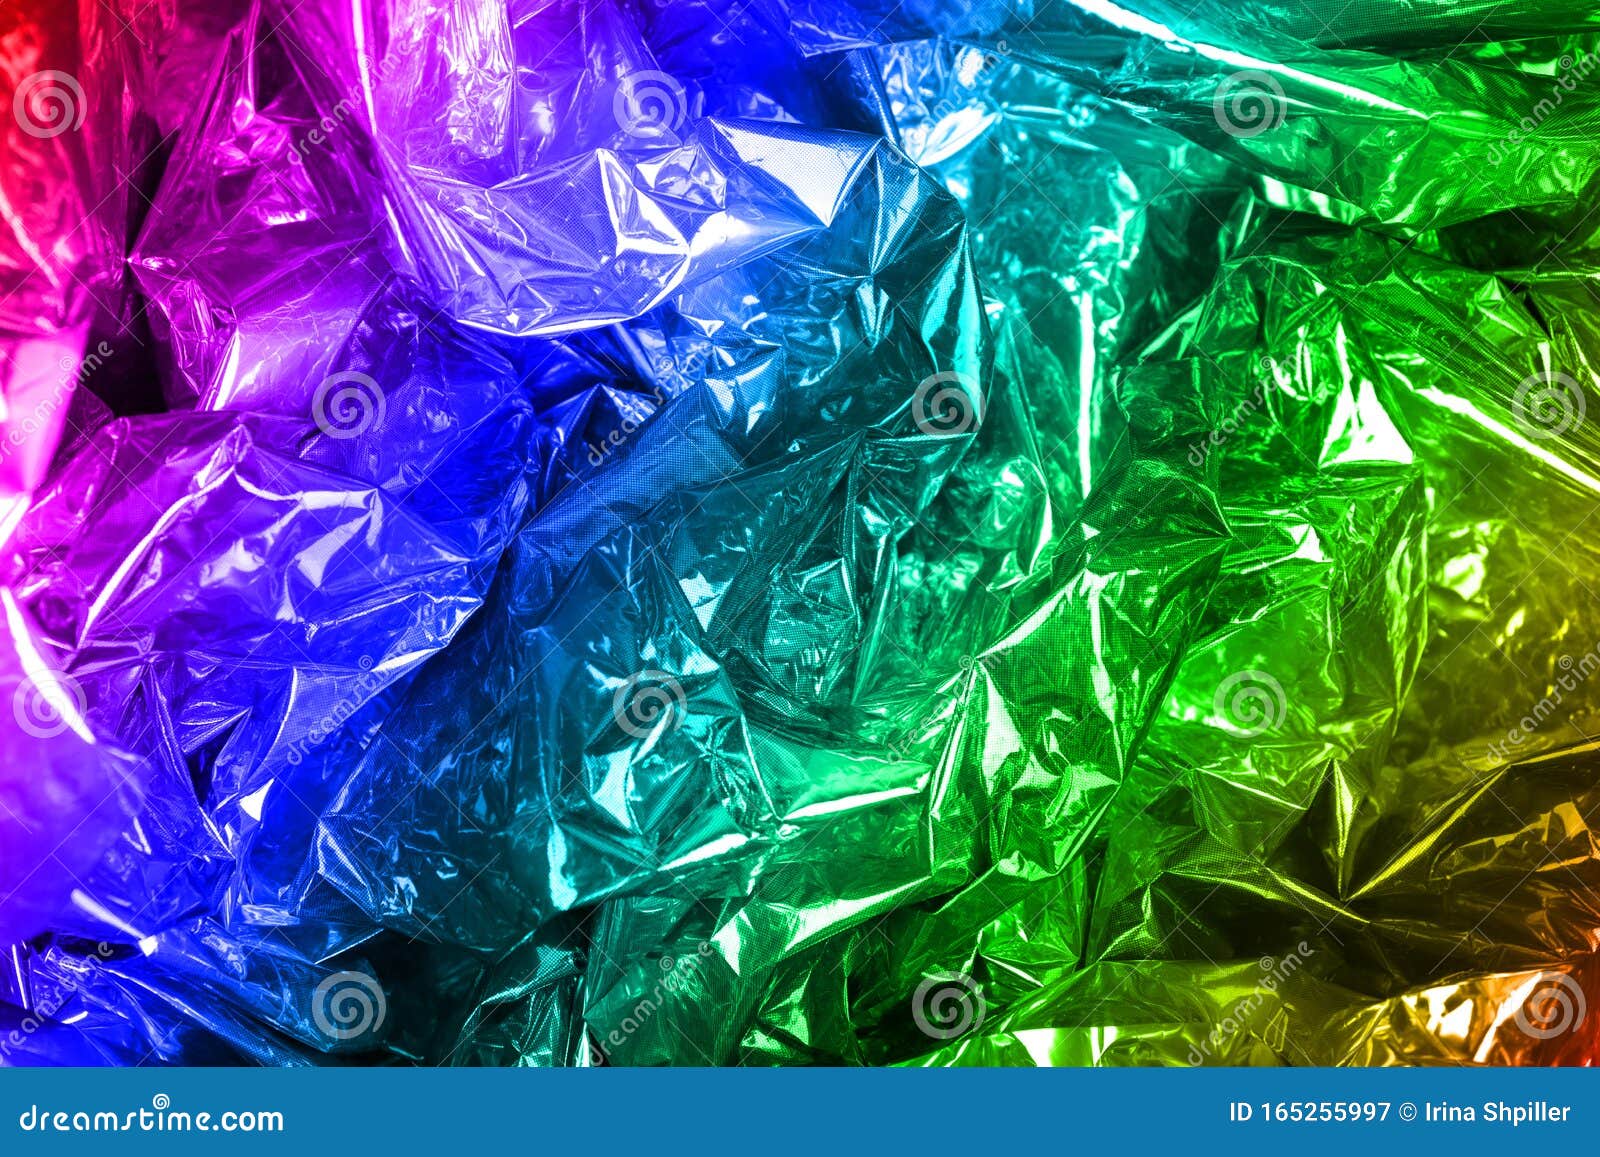 Crumpled Holographic Wrapping Paper With Shiny Effect Close Up